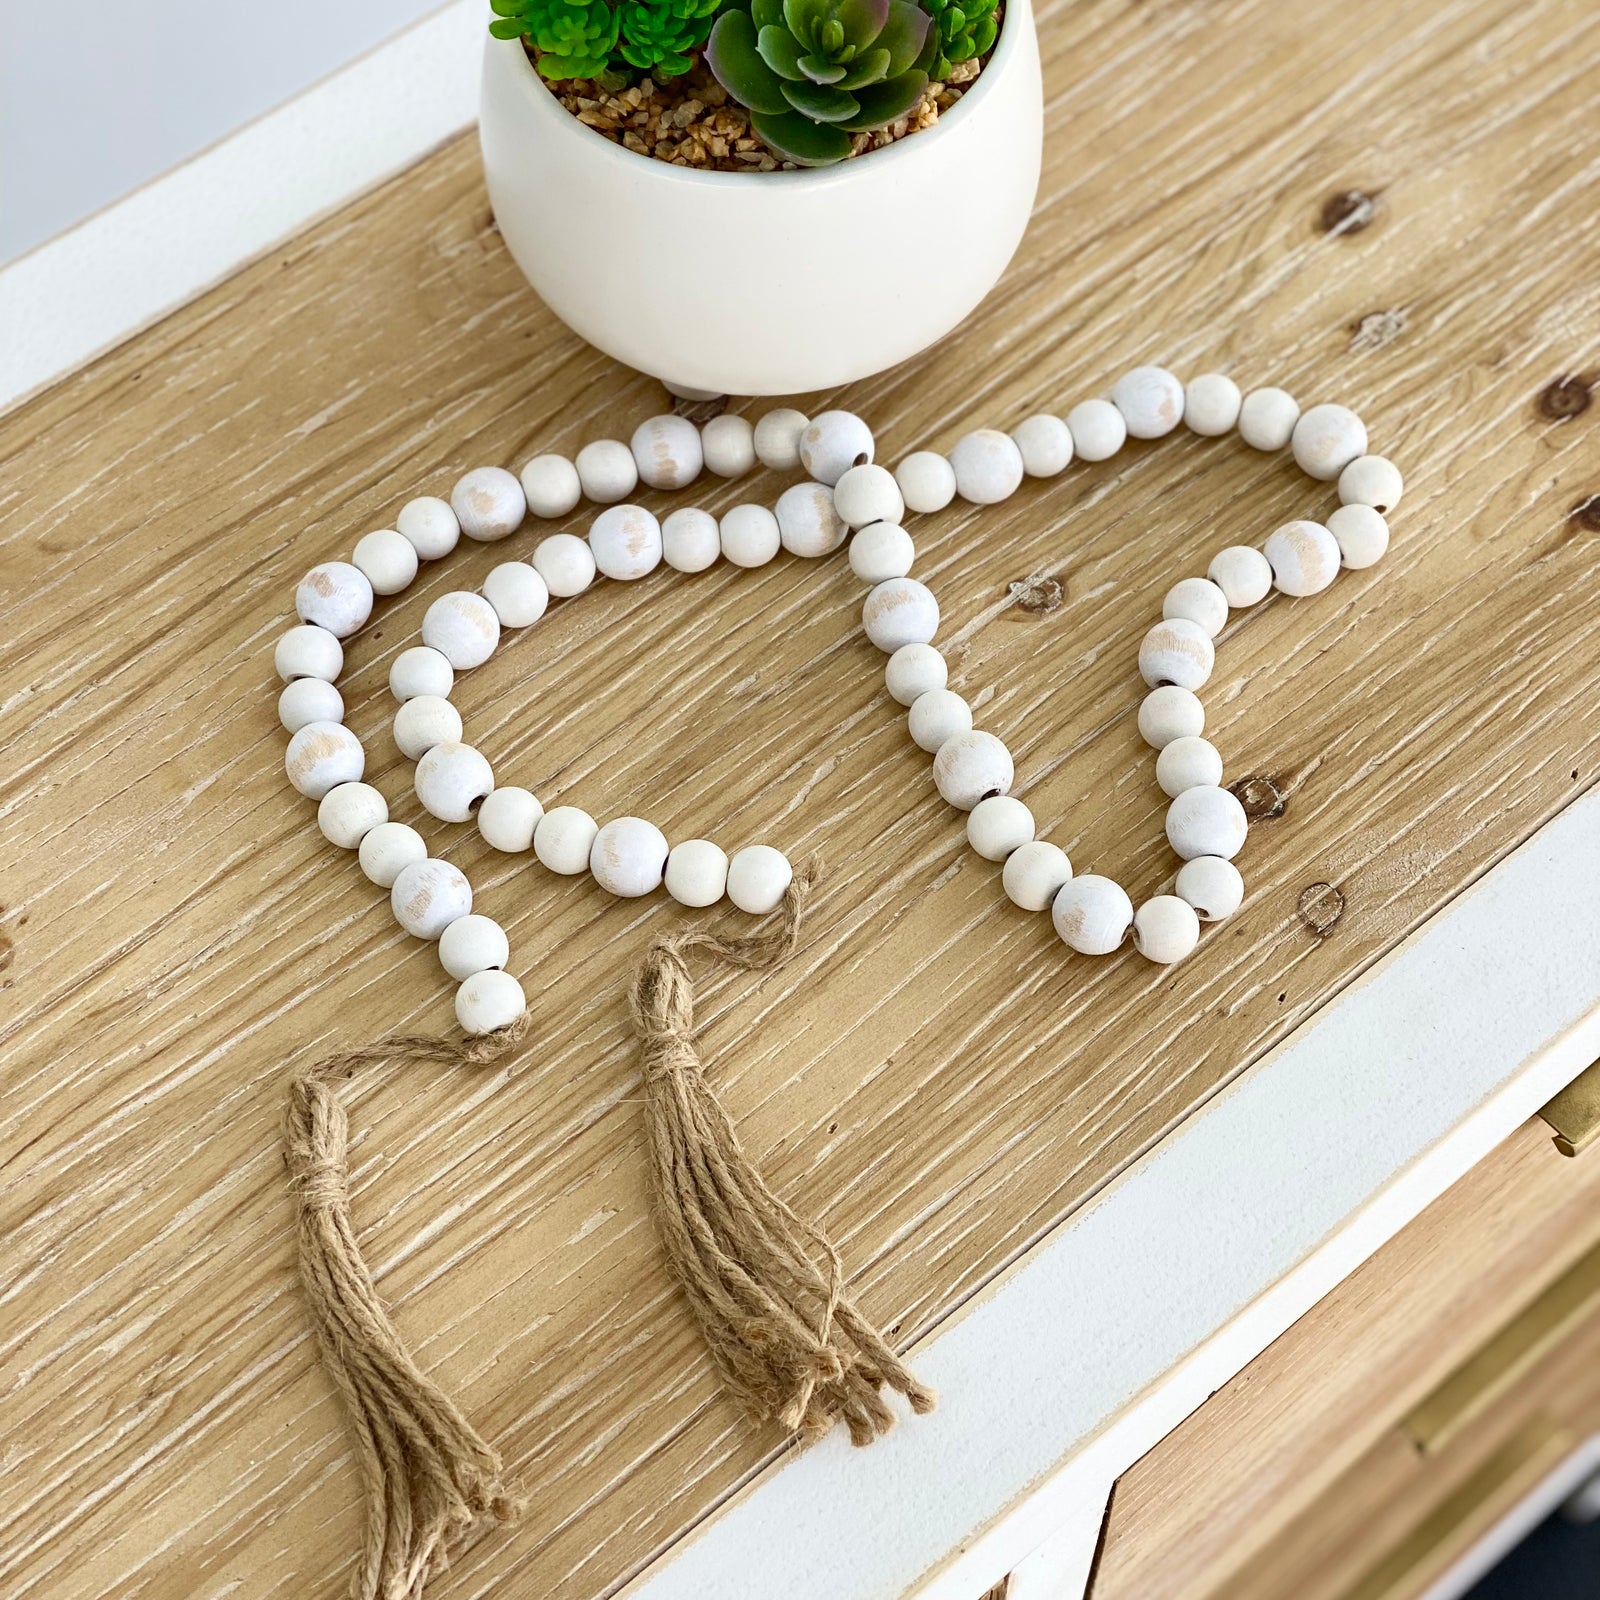 How to make a Wood Bead Garland - The Ginger Home